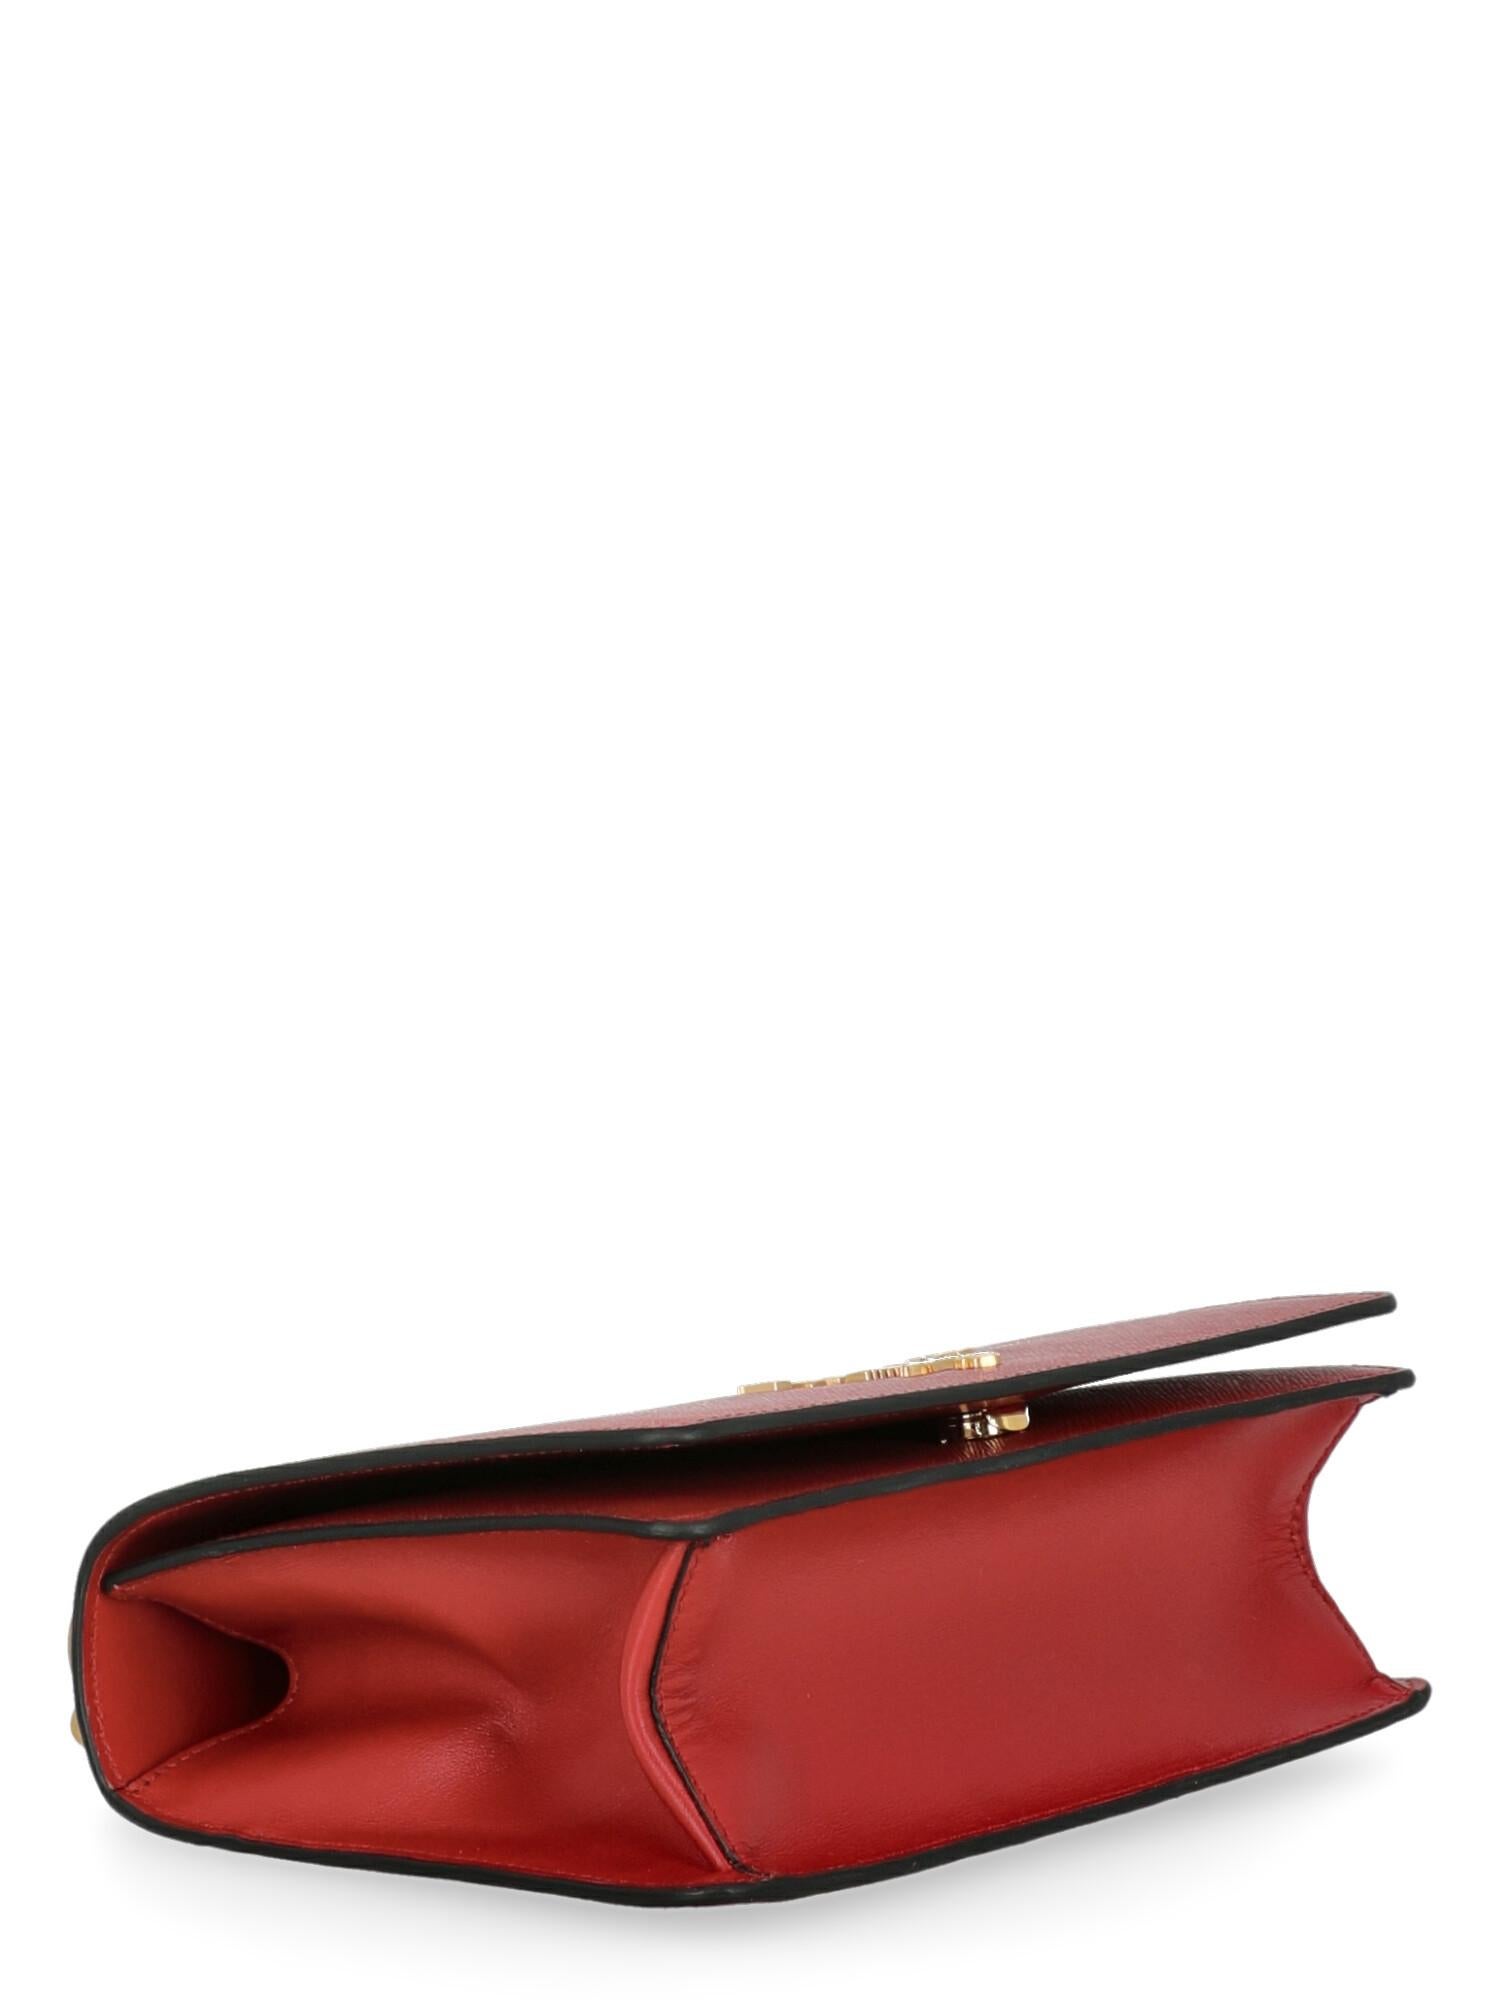 Women's Prada  Women   Shoulder bags   Red Leather  For Sale